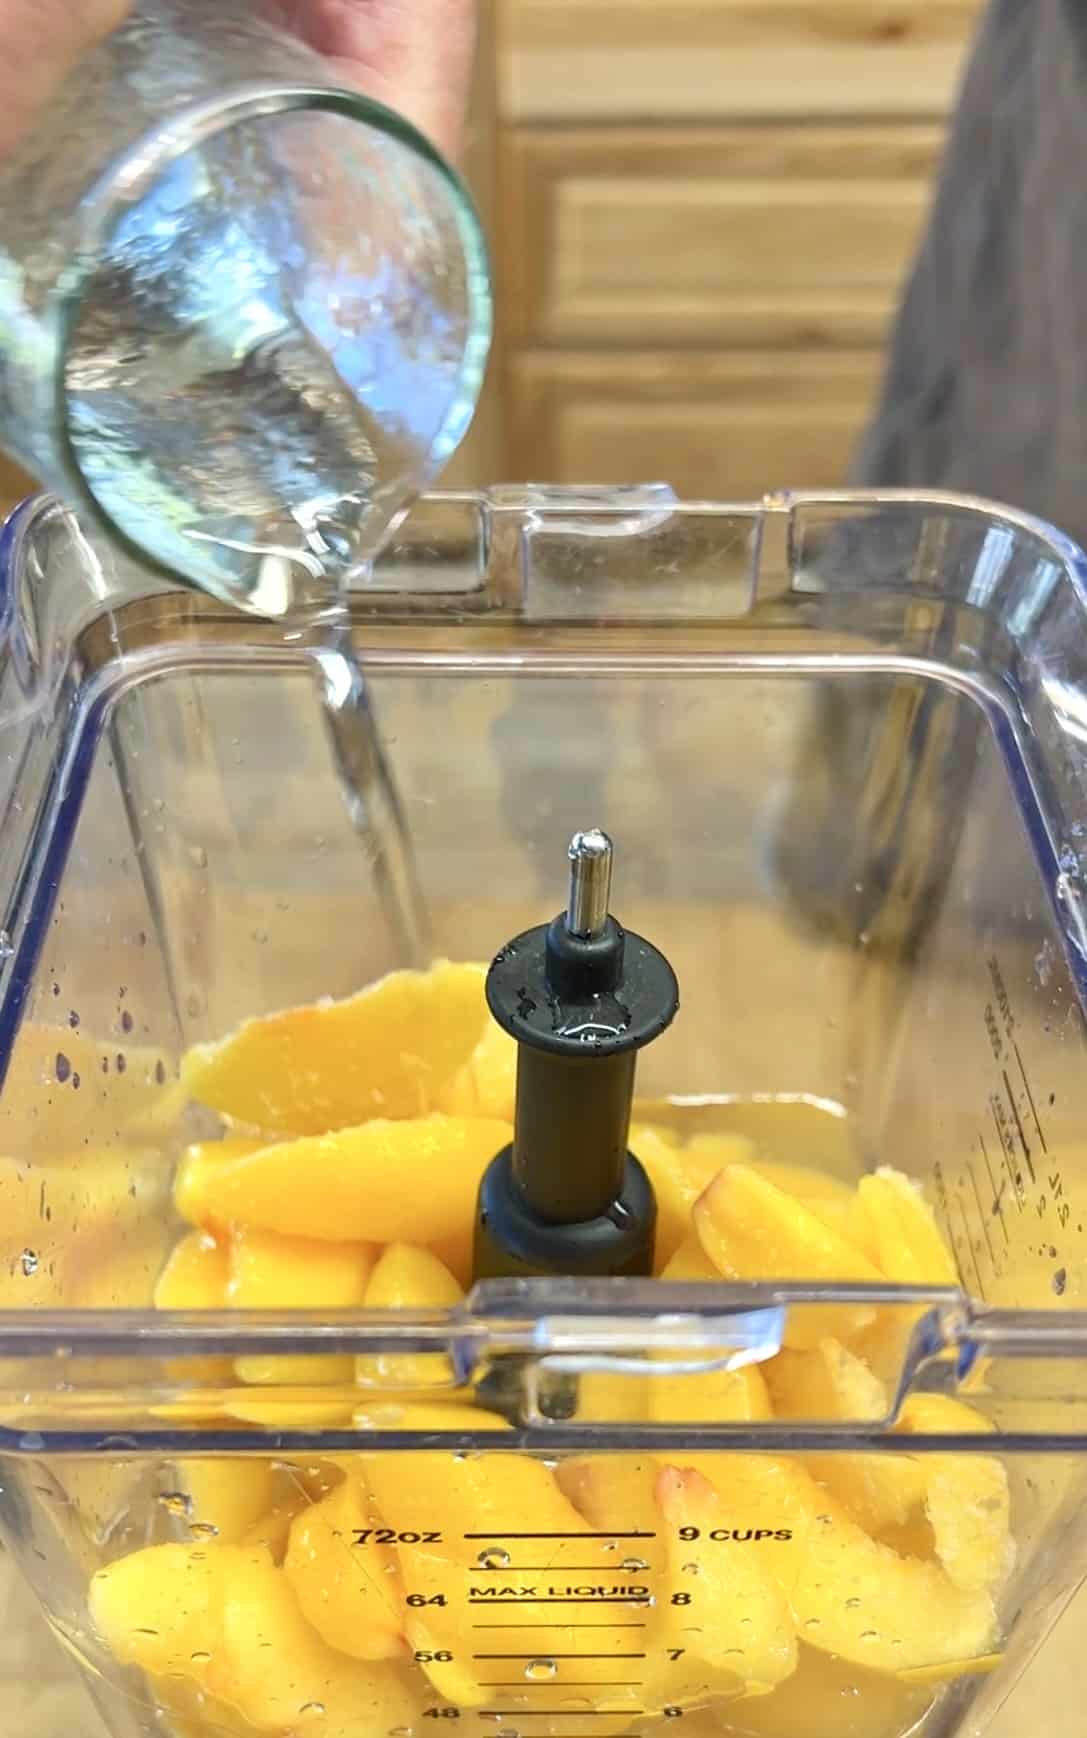 Pouring simple syrup into a blender with peaches.